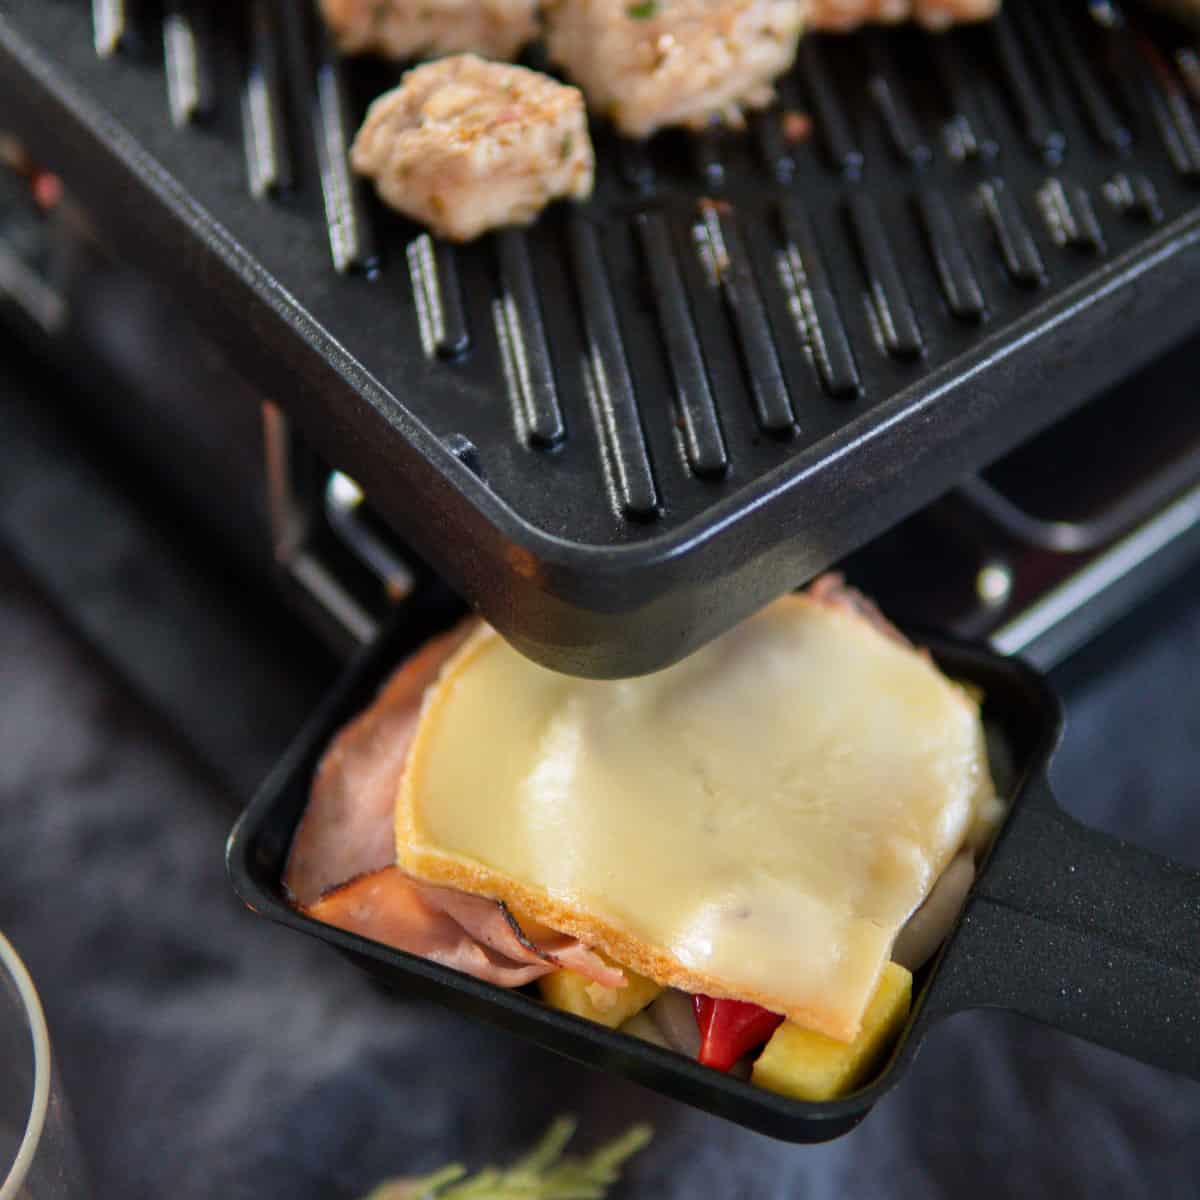 raclette cheese melting on a raclette grill